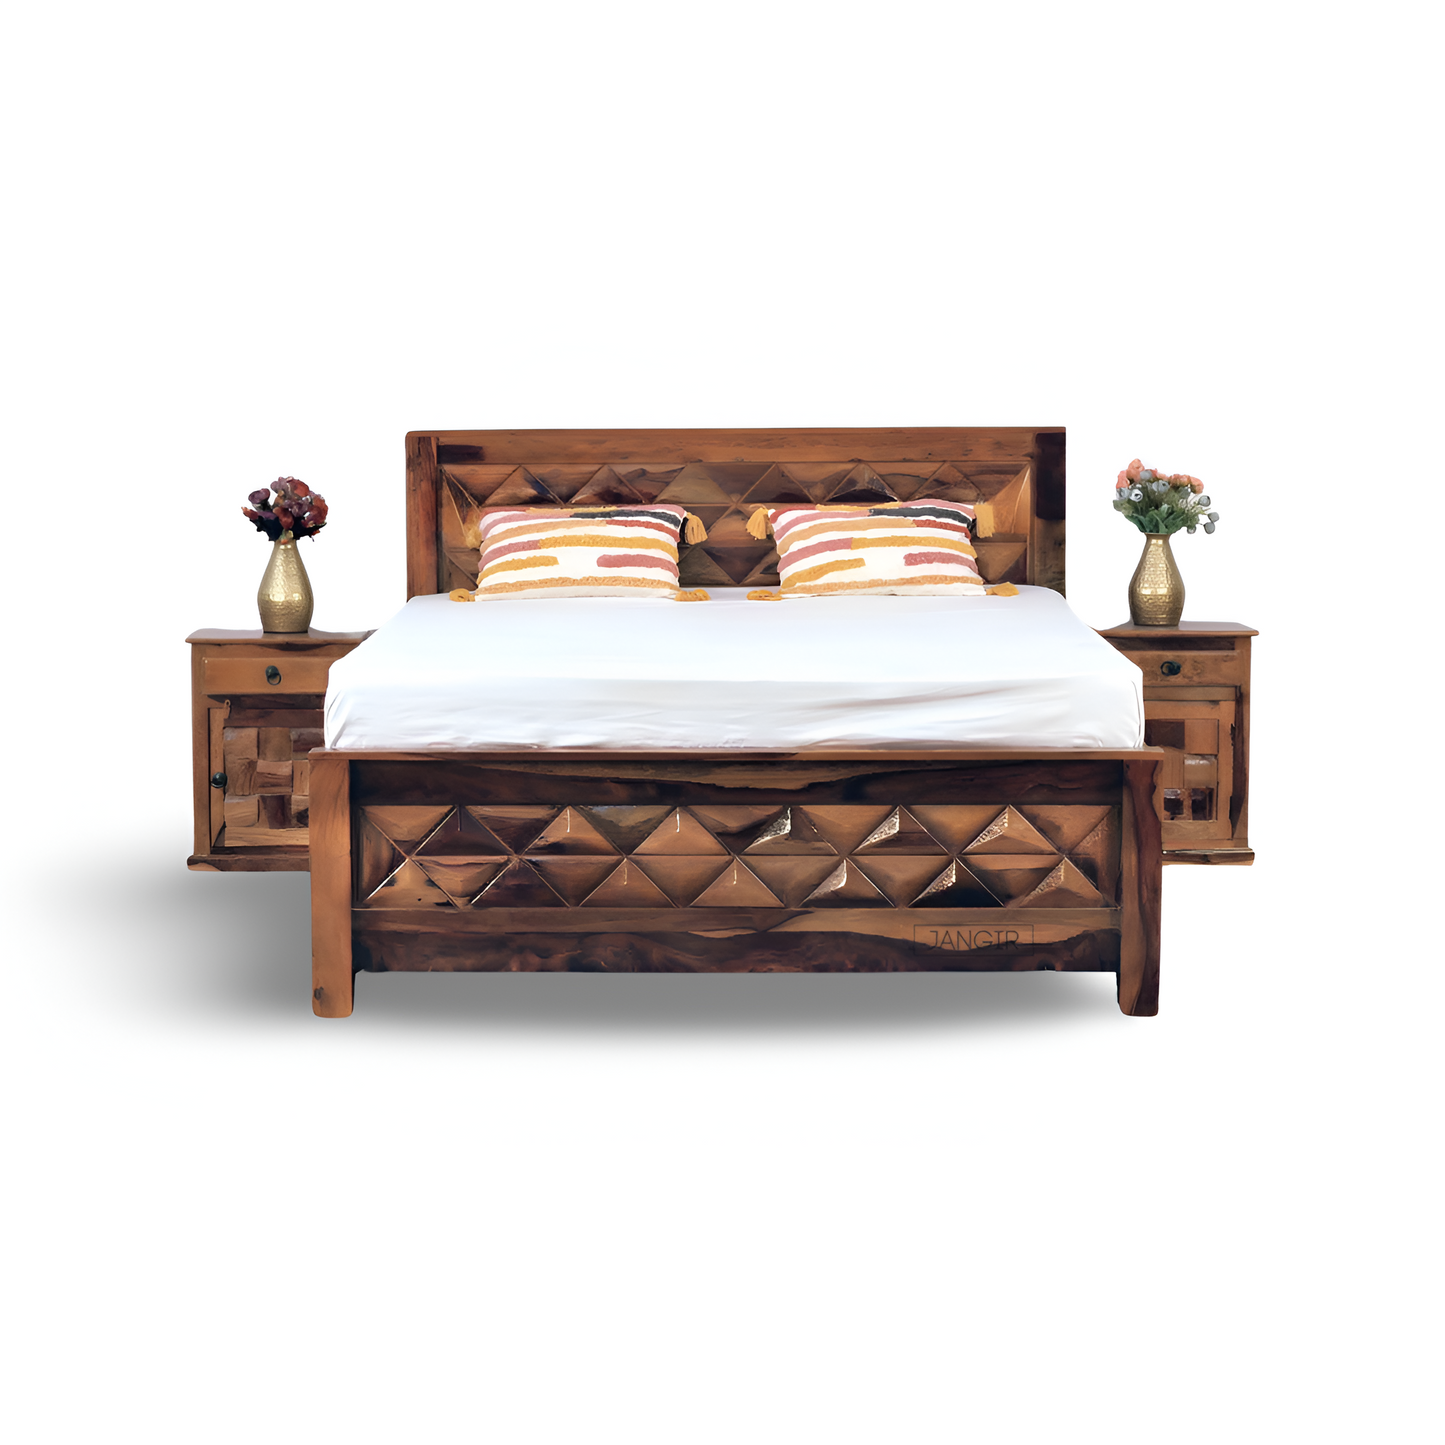 Discover exquisite designer wooden storage beds in king and queen sizes made from durable sheesham wood for durability and style. Upgrade your sleeping space now with ease, only near you in Bangalore!